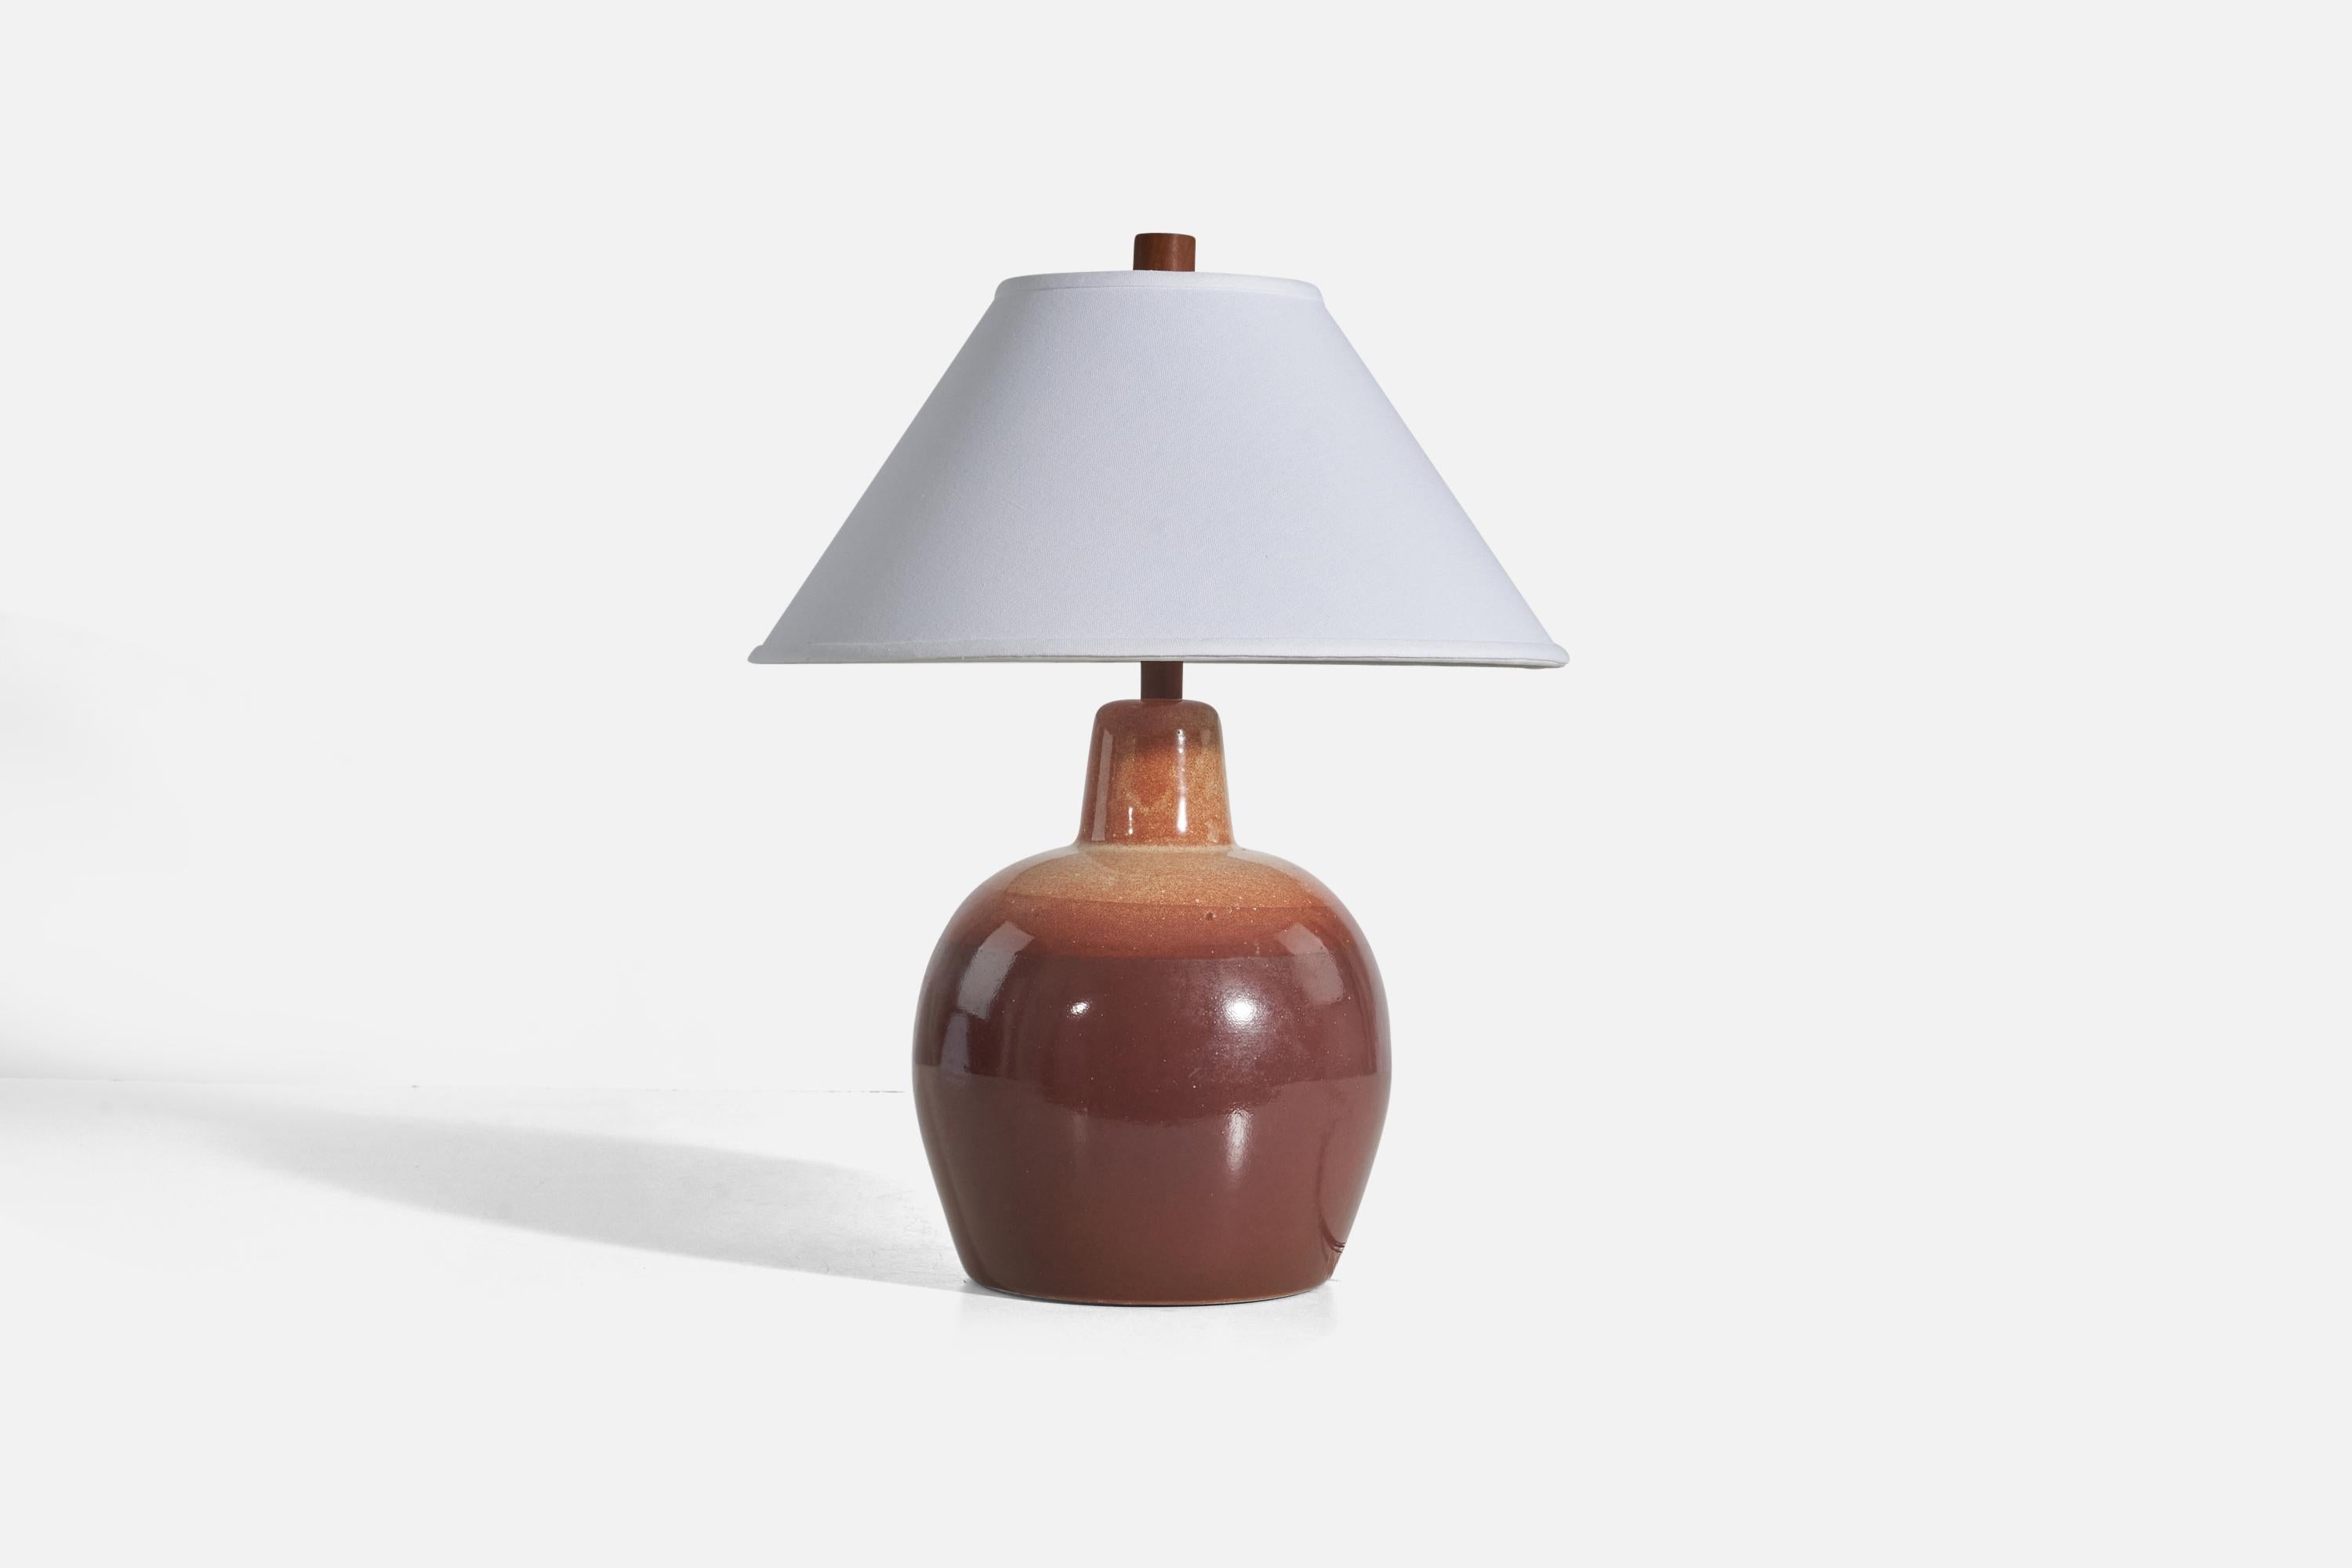 A brown ceramic and walnut table lamp designed by Jane & Gordon Martz and produced by Marshall Studios, Indianapolis, 1950s.

Sold without Lampshade
Dimensions of Lamp (inches) : 15.62 x 9.56 x 9.56 (Height x Width x Depth)
Dimensions of Lampshade